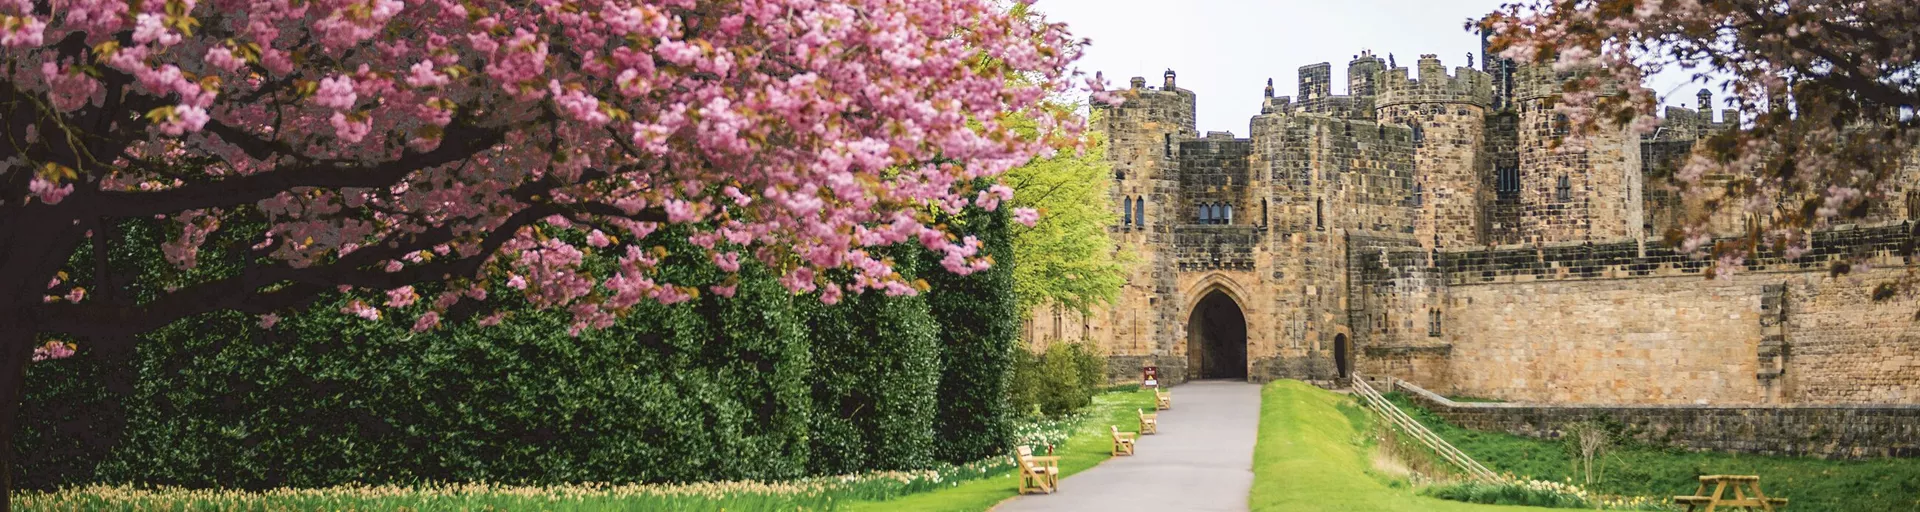 Alnwick Castle in England, the UK during spring